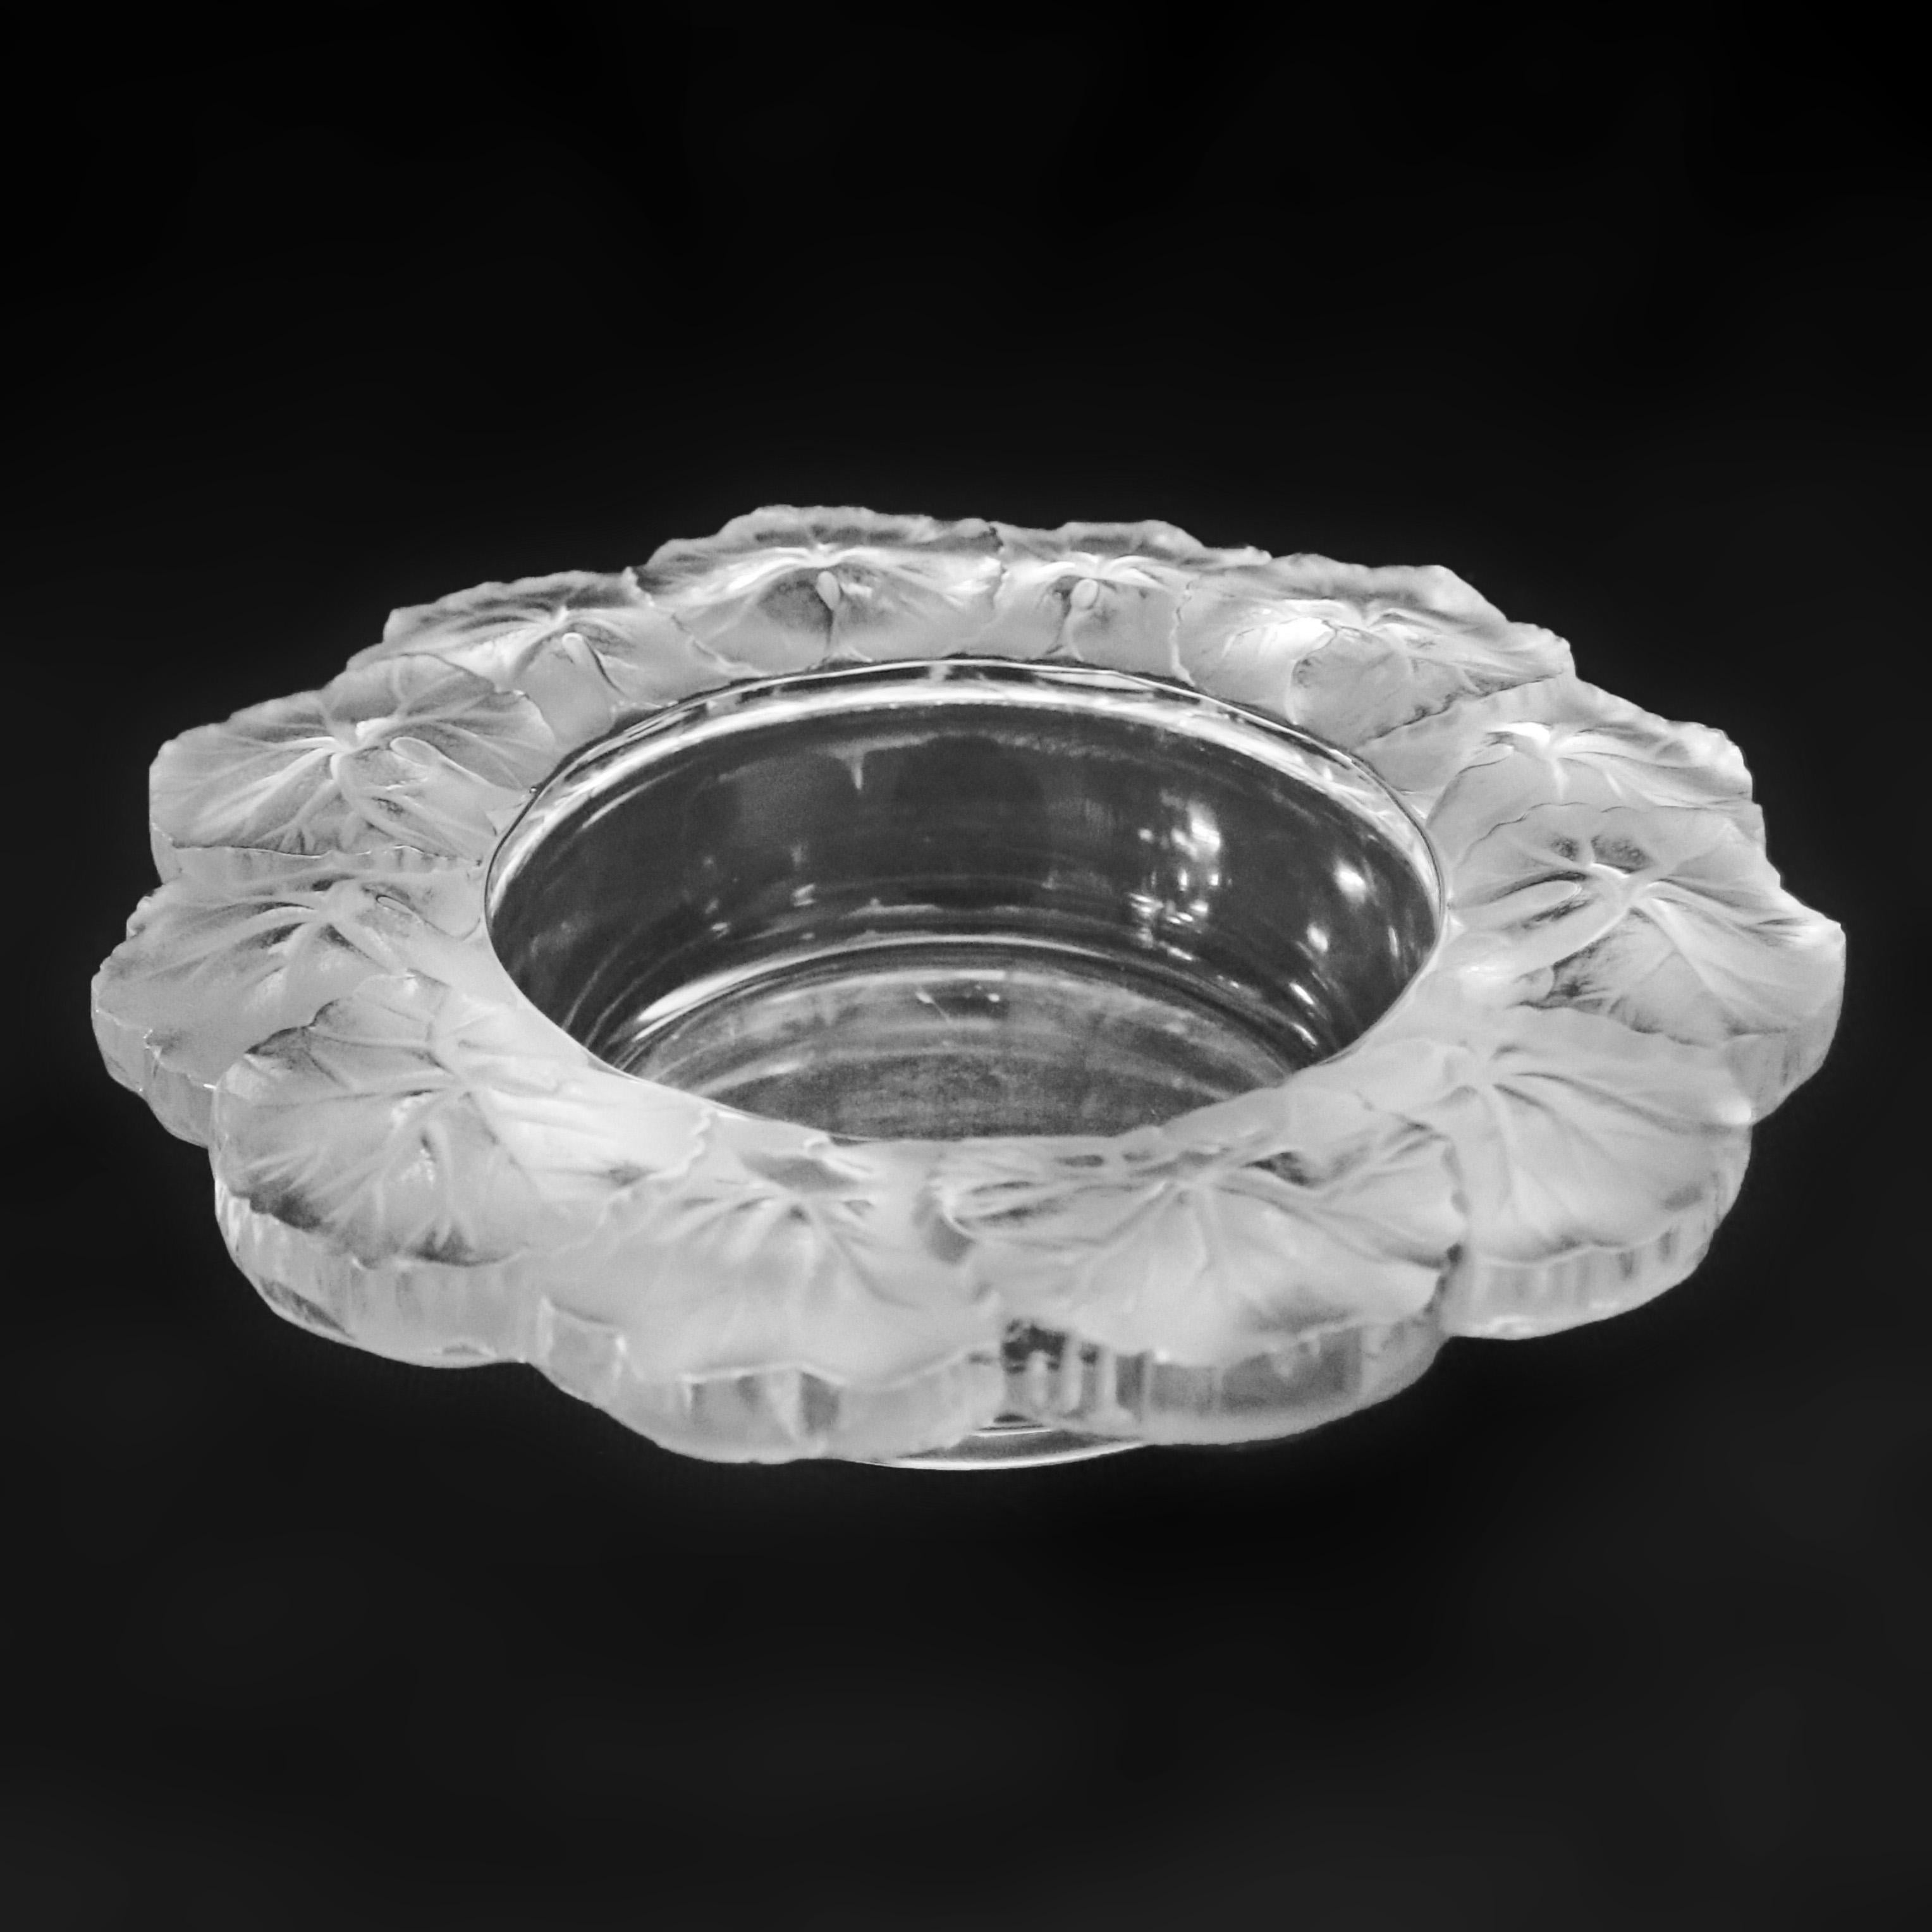 20th Century Vintage French Lalique Crystal Opalescent Floral Form Bowl, Signed, circa 1930